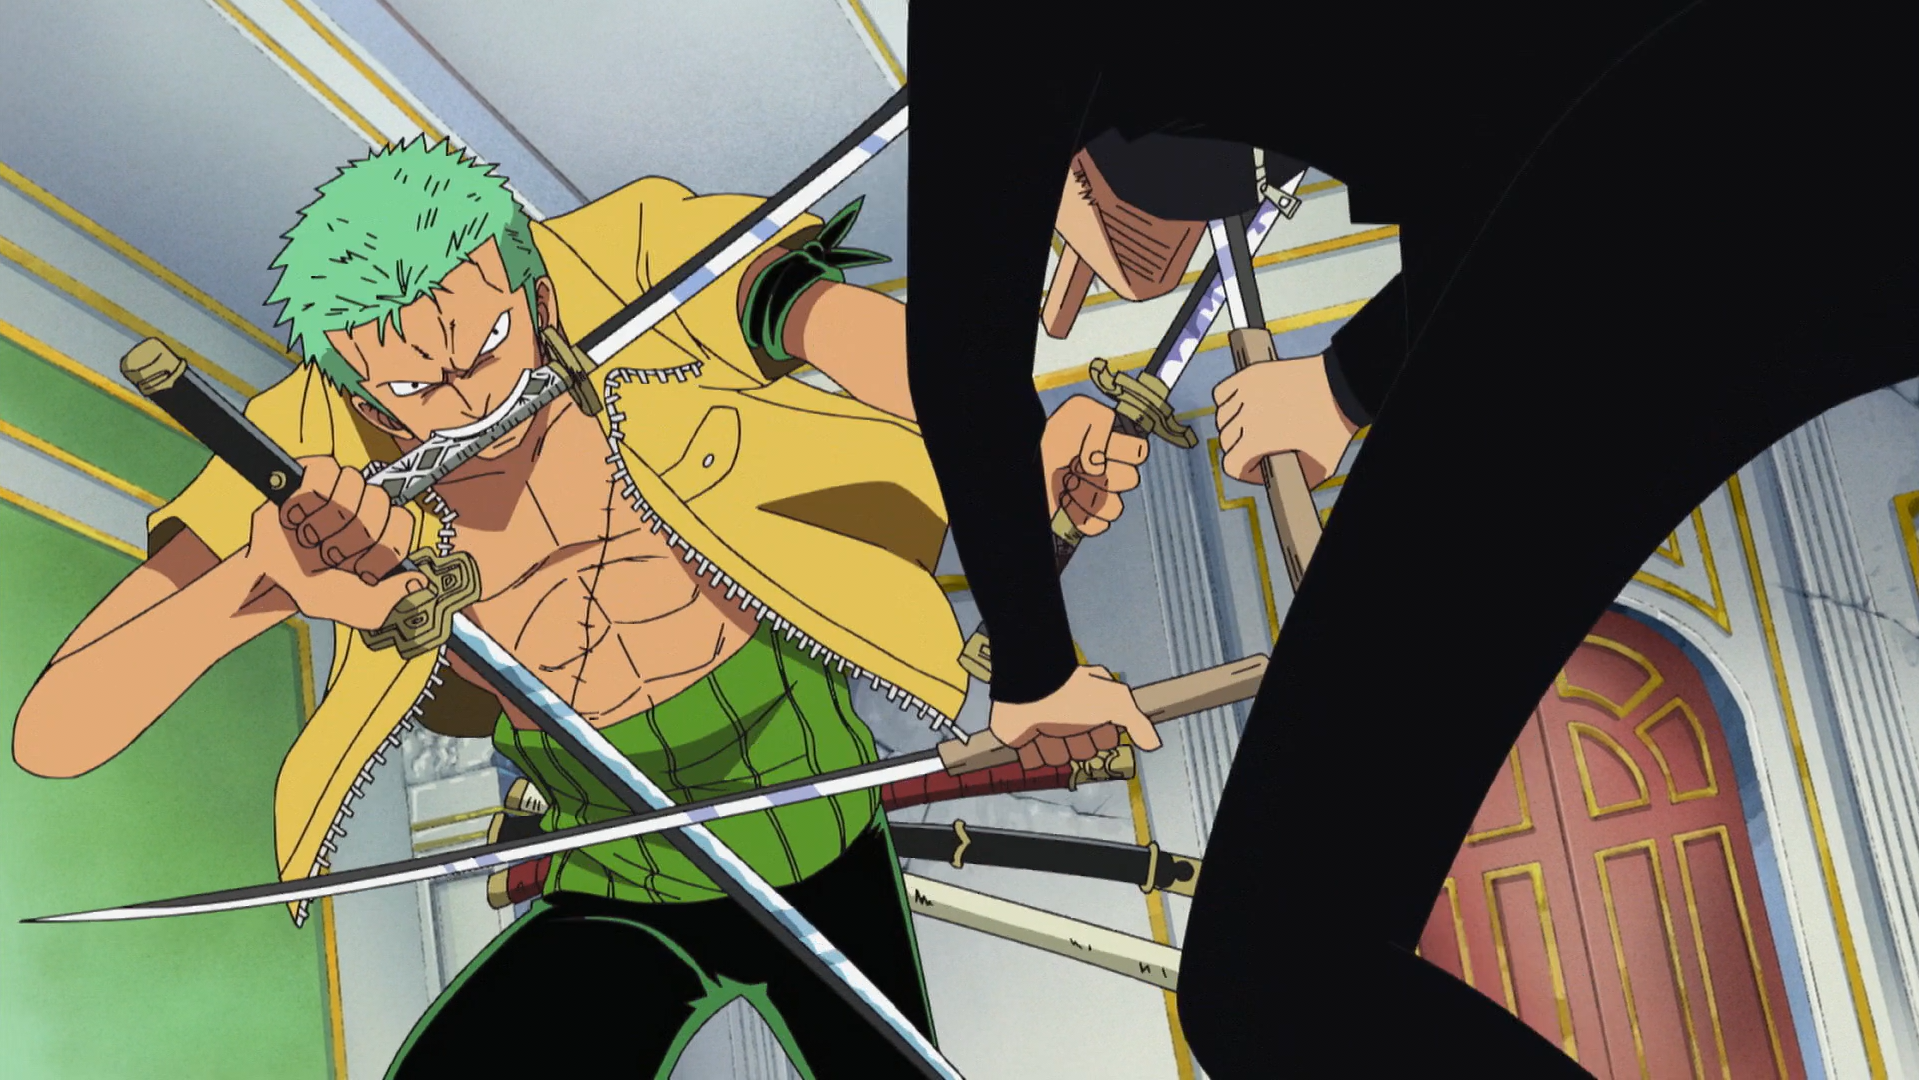 Luffy's sword and spear: Zoro and Sanji. : r/OnePiece